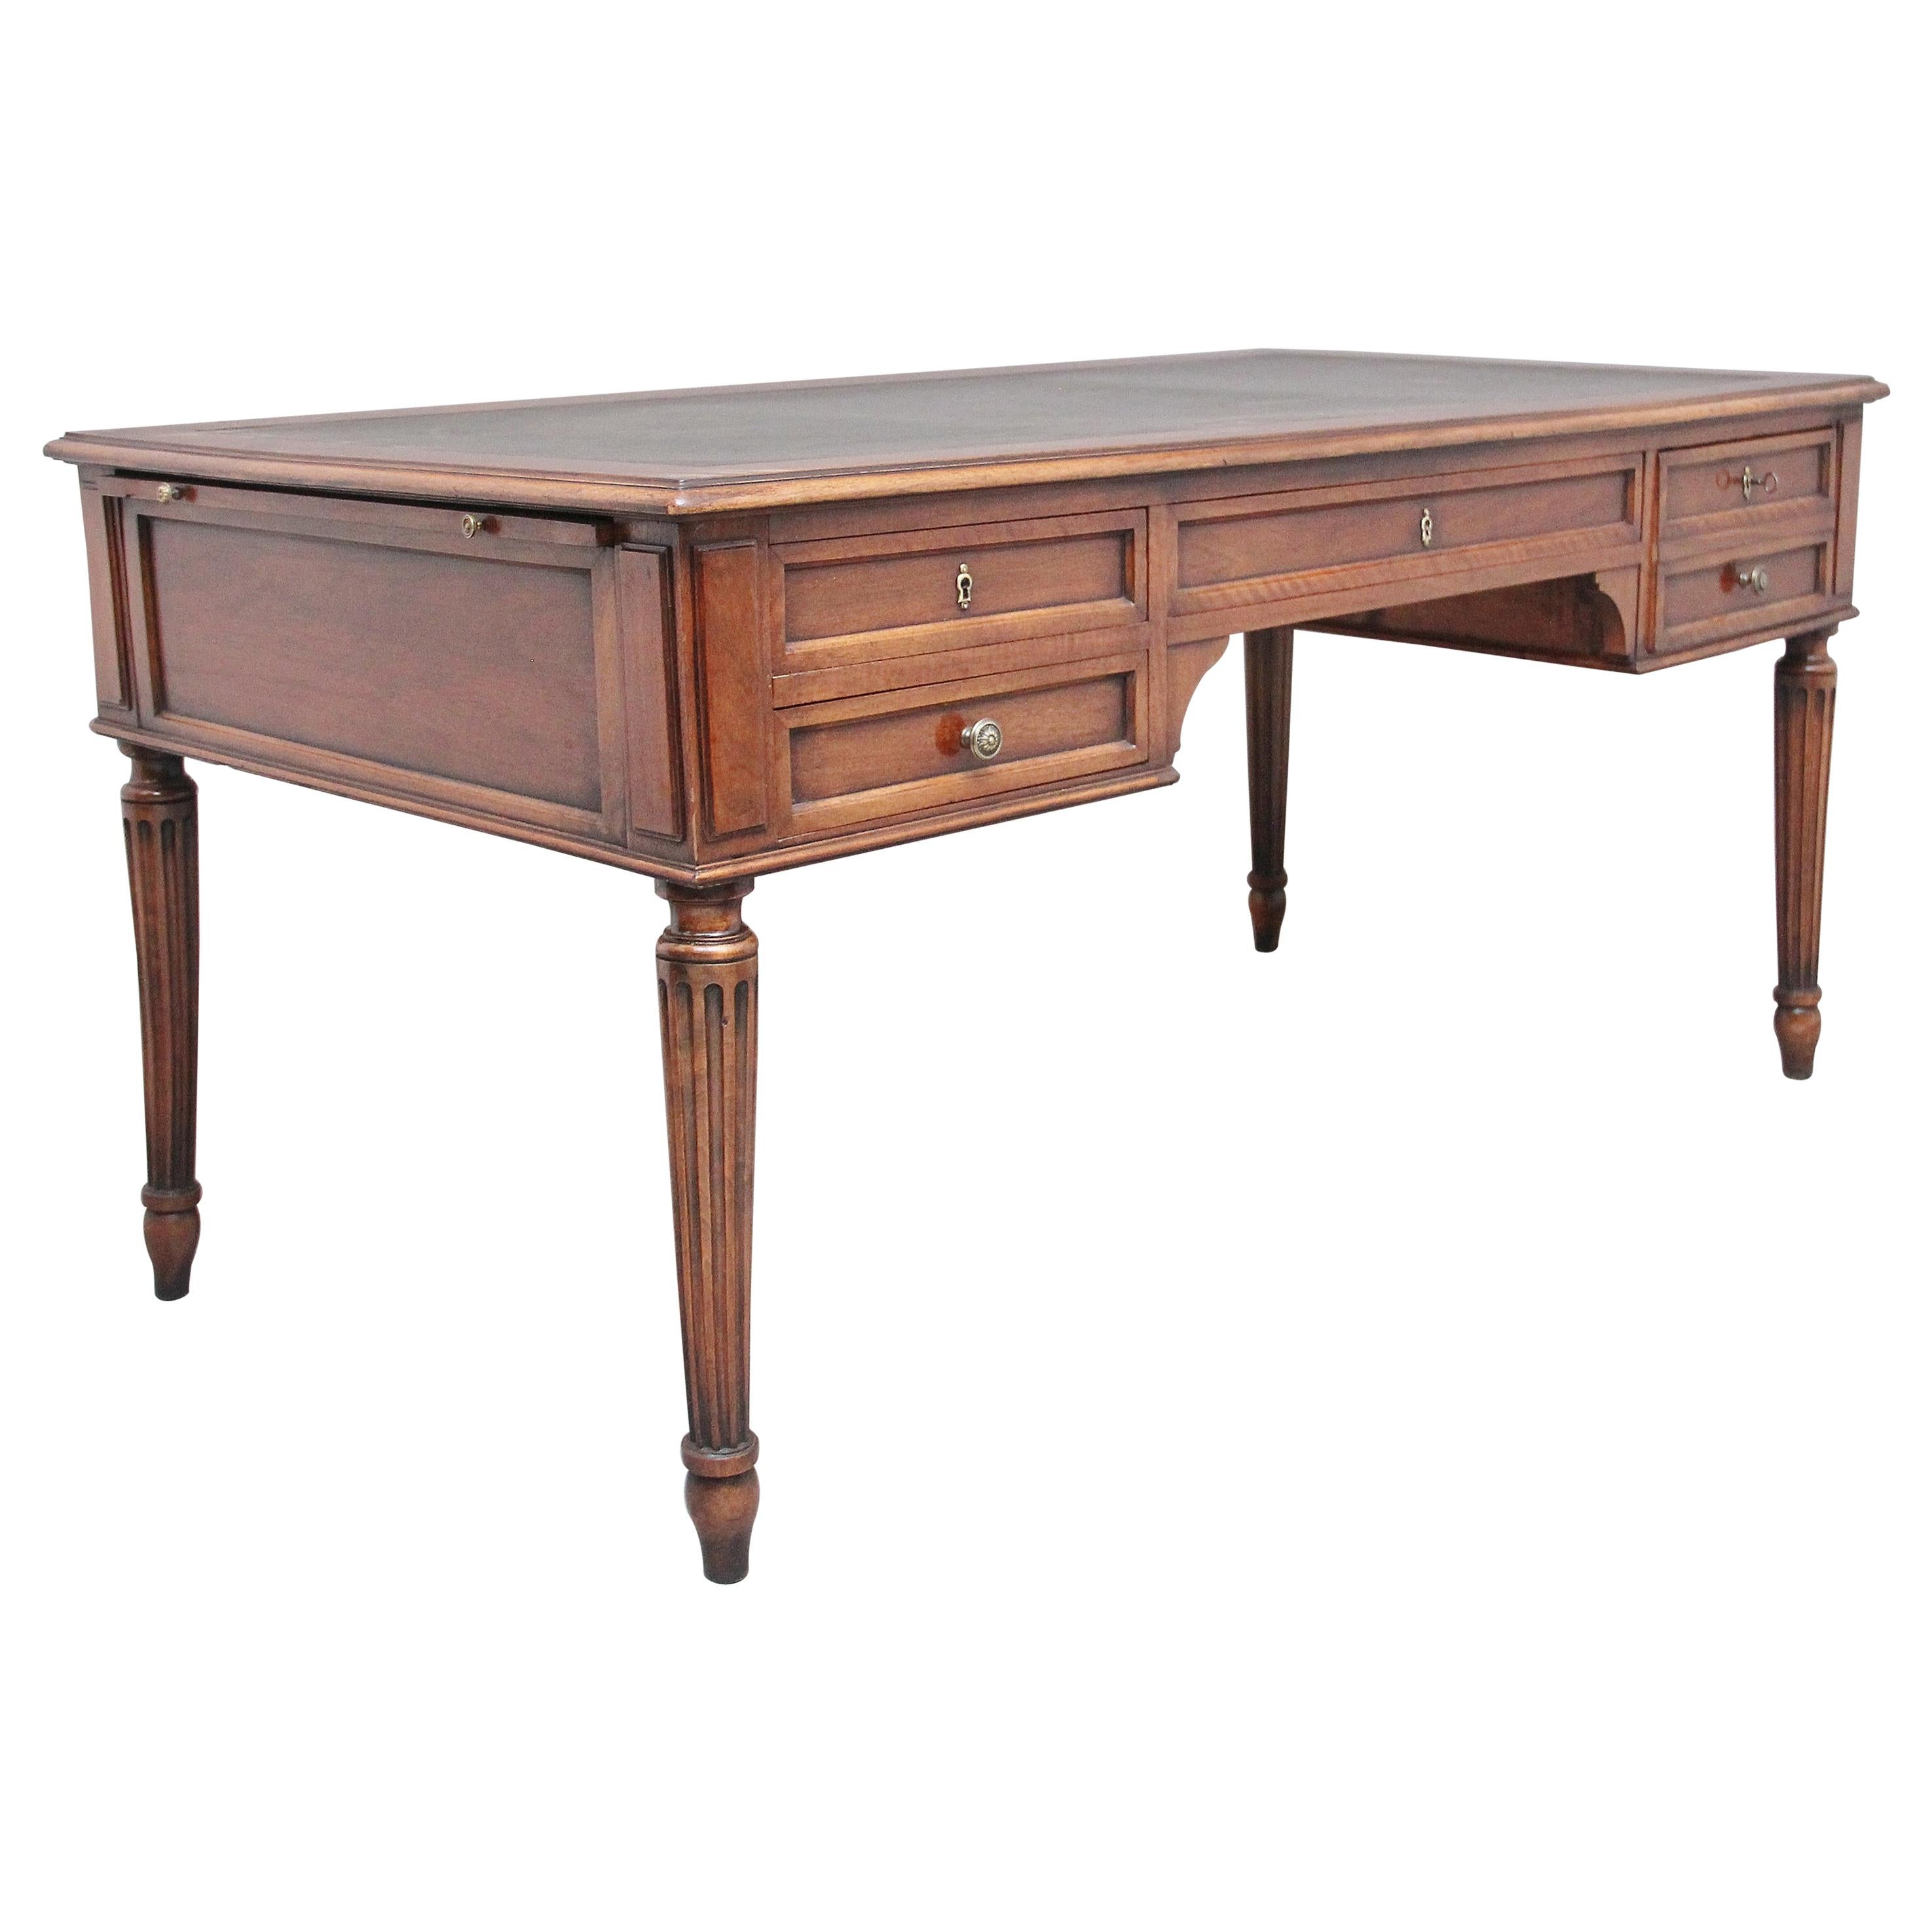 19th Century French Walnut Writing Table